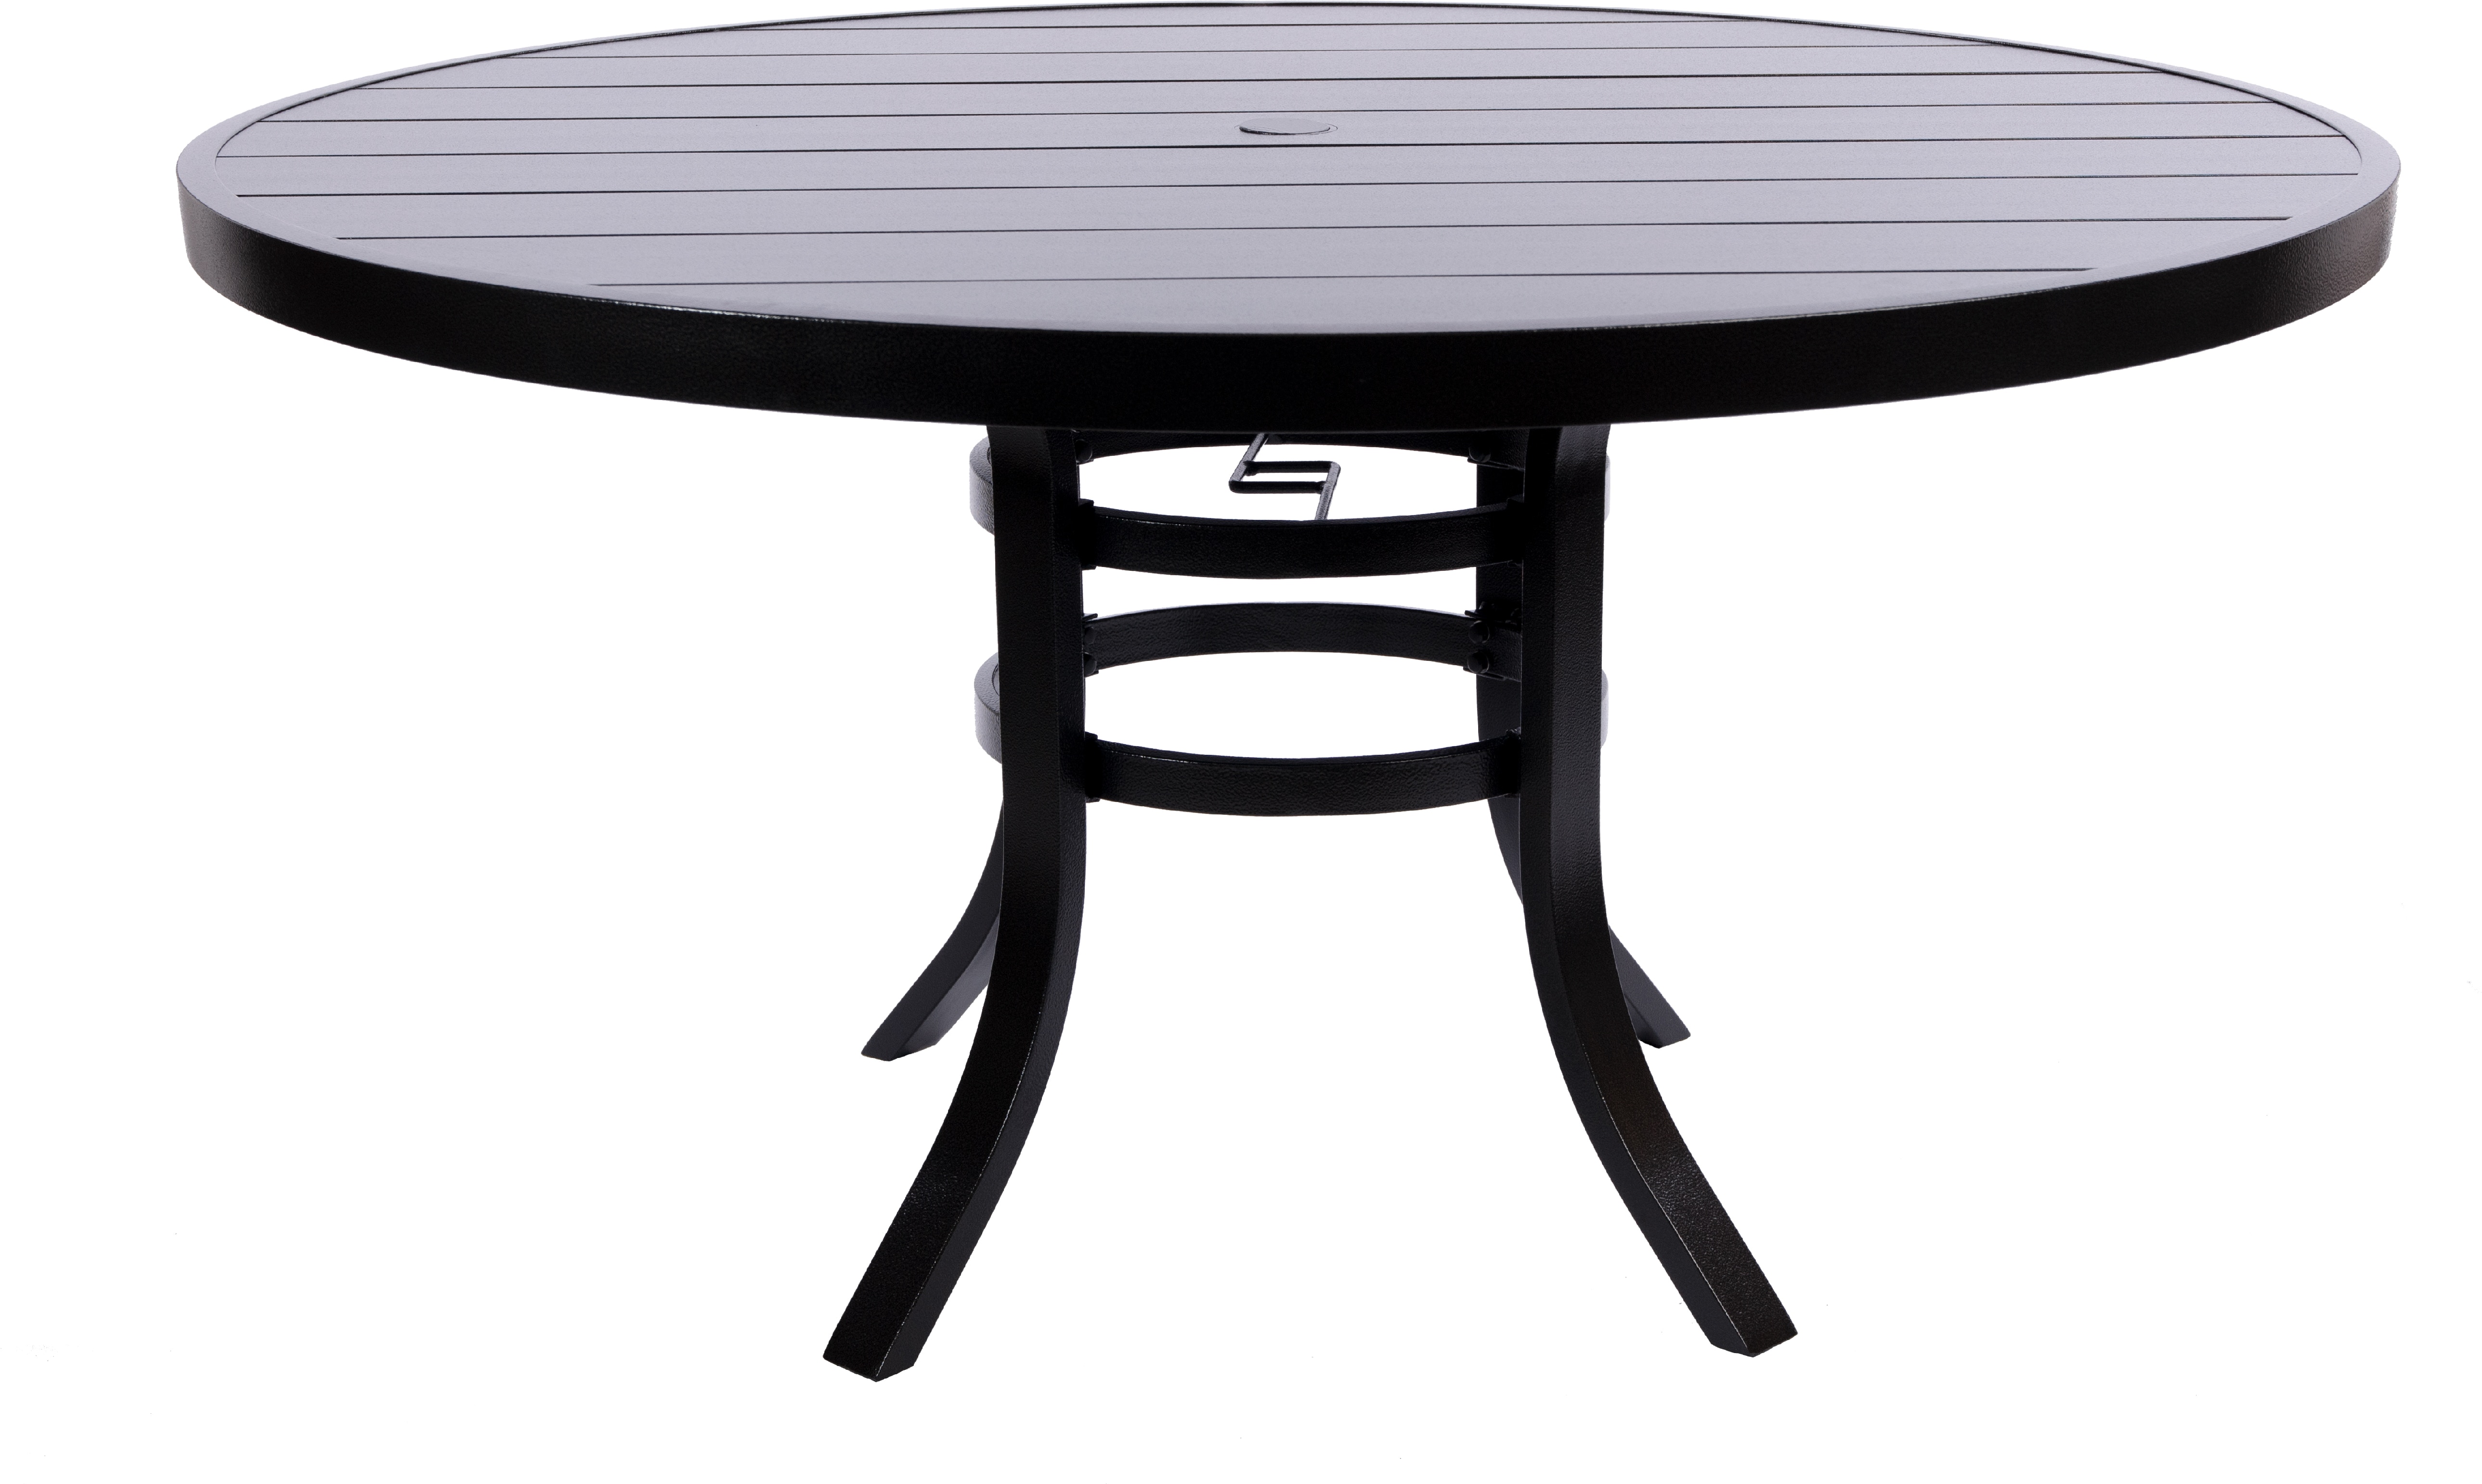 American Home Outdoor Patio Dining Table 54 Inch Round Aluminum Slat Dining Table Aminis